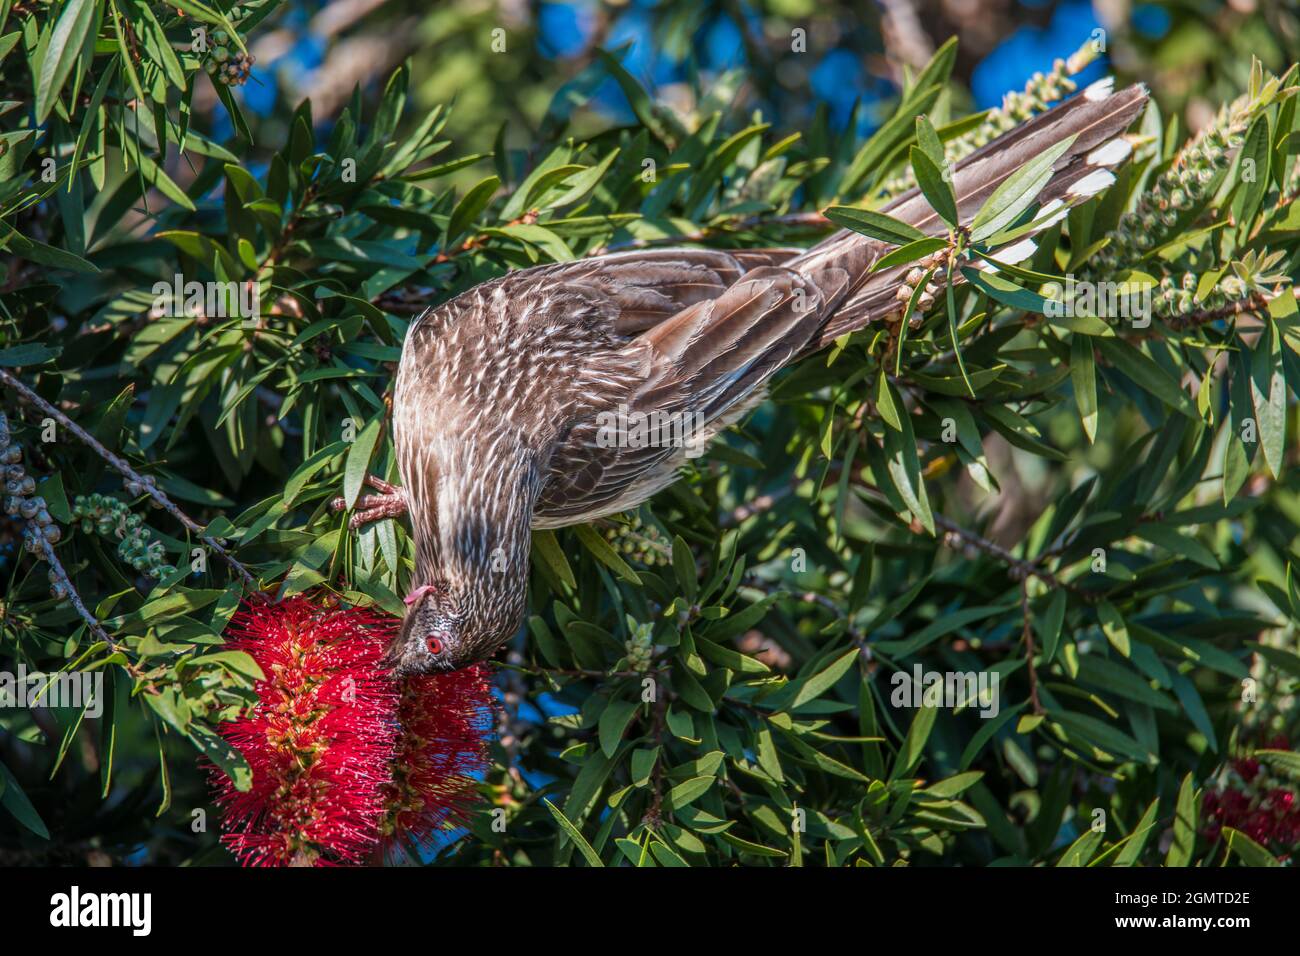 The Red Wattlebird is the largest of the Australian honeyeaters and enjoyes the nectar of the bottlebrush at Woy Woy, NSW, Australia. Stock Photo